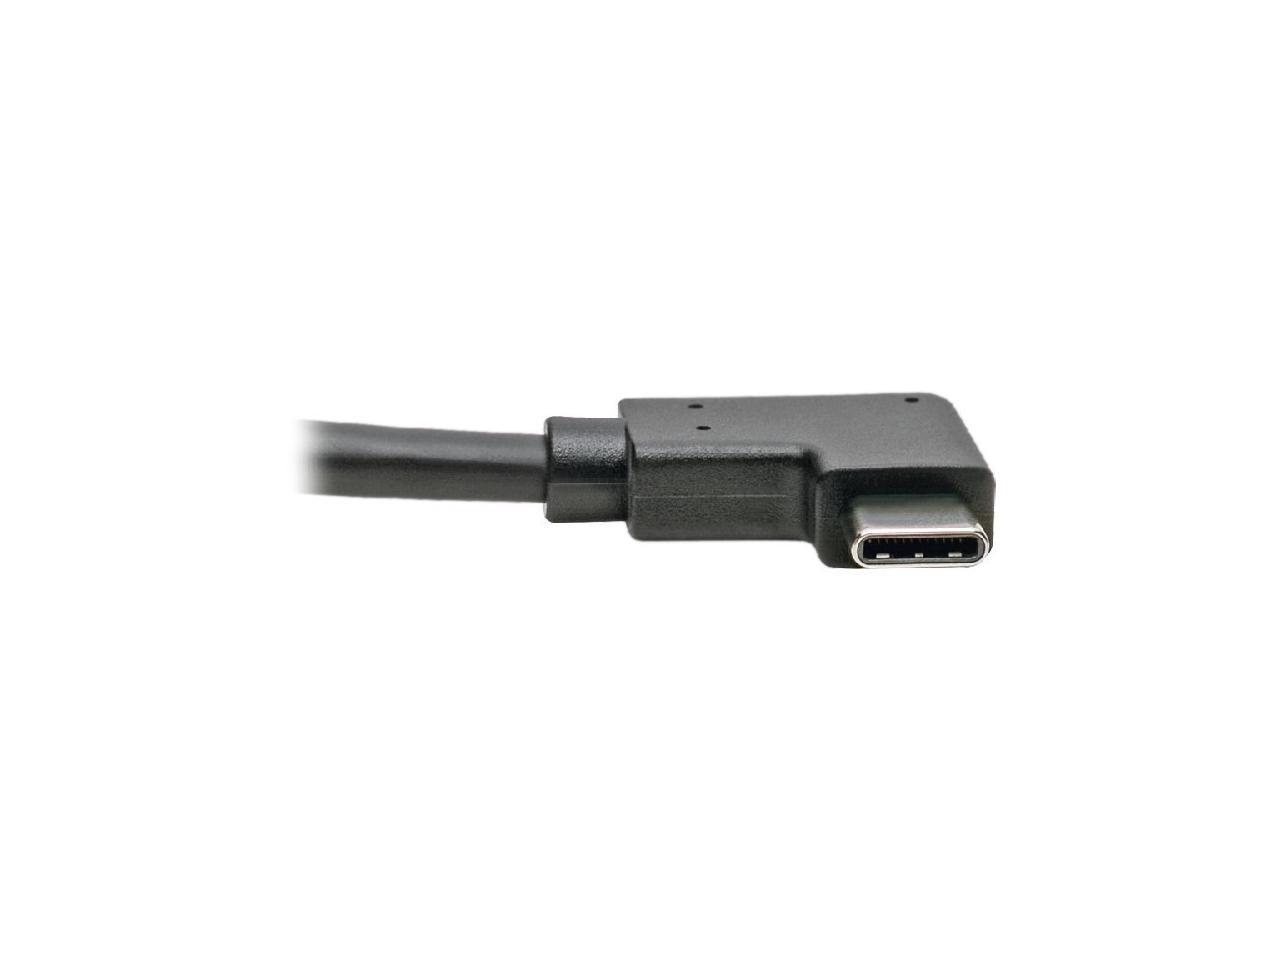 Tripp Lite U428-003-CRA Right-Angle USB-C to USB-A Cable, M/M, 3 ft. - USB for Hard Drive, Workstation, Tablet, Smartphone, Wall Charger, Car Charger, MacBook, Ultrabook, Chromebook, Printer, Scanner, - image 2 of 19